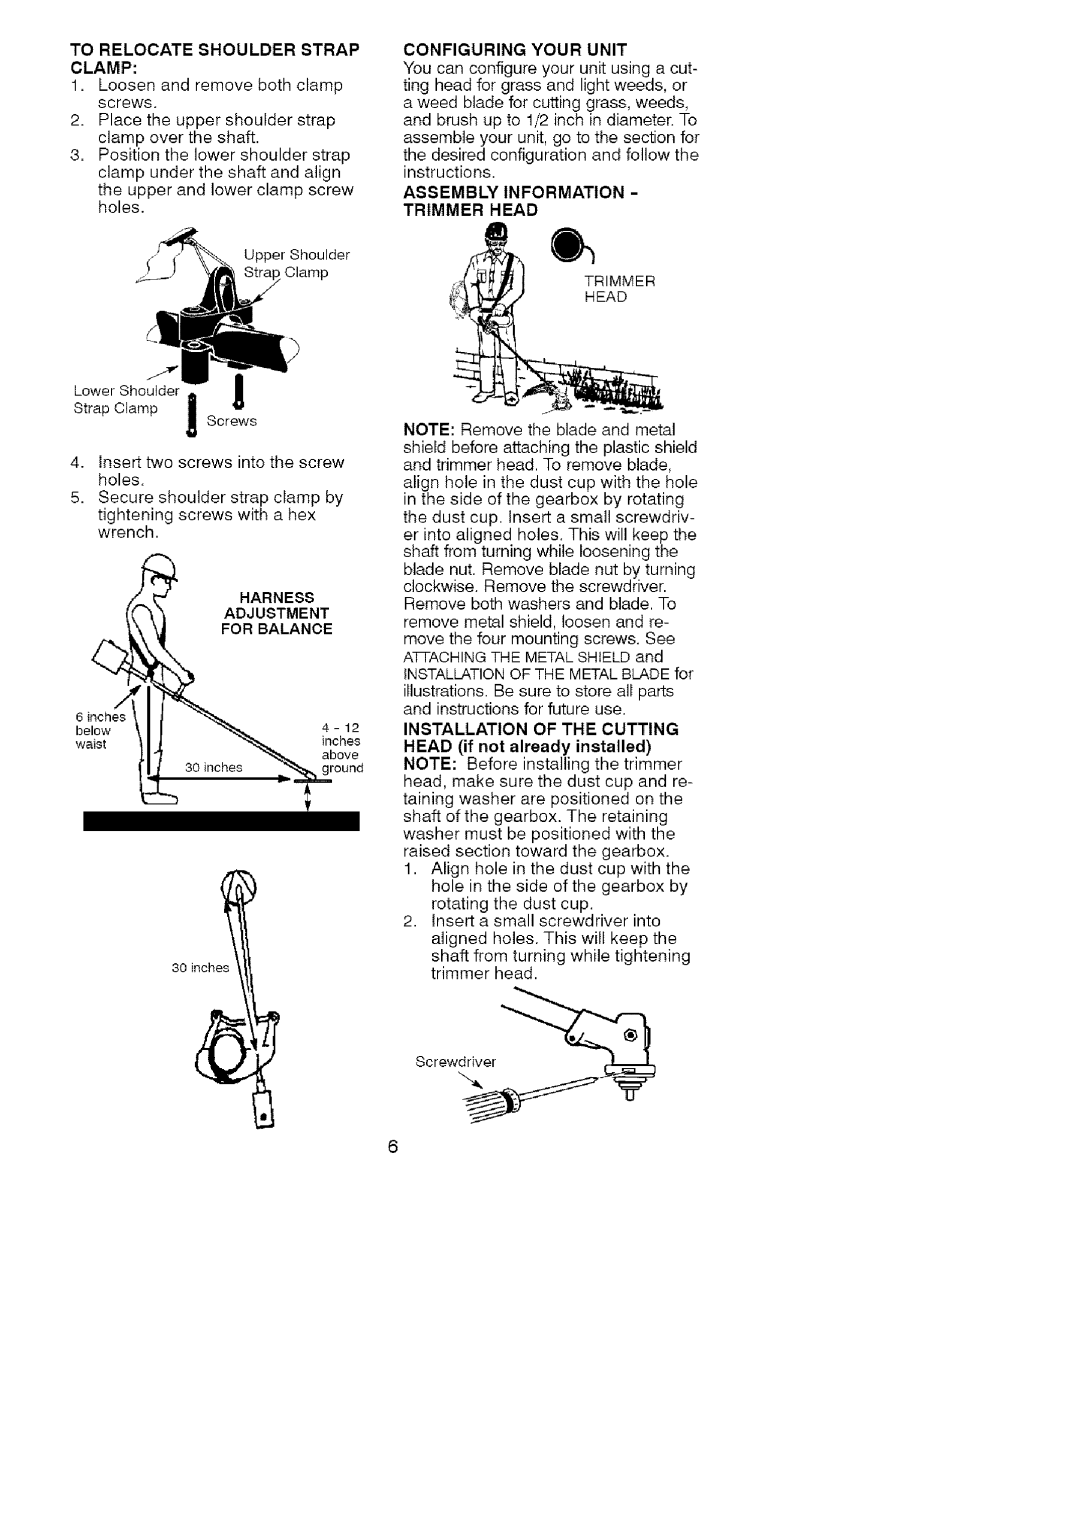 Craftsman 358.7958 manual To Relocate Shoulder Strap, Installation Of The Cutting, HEAD if not already installed 